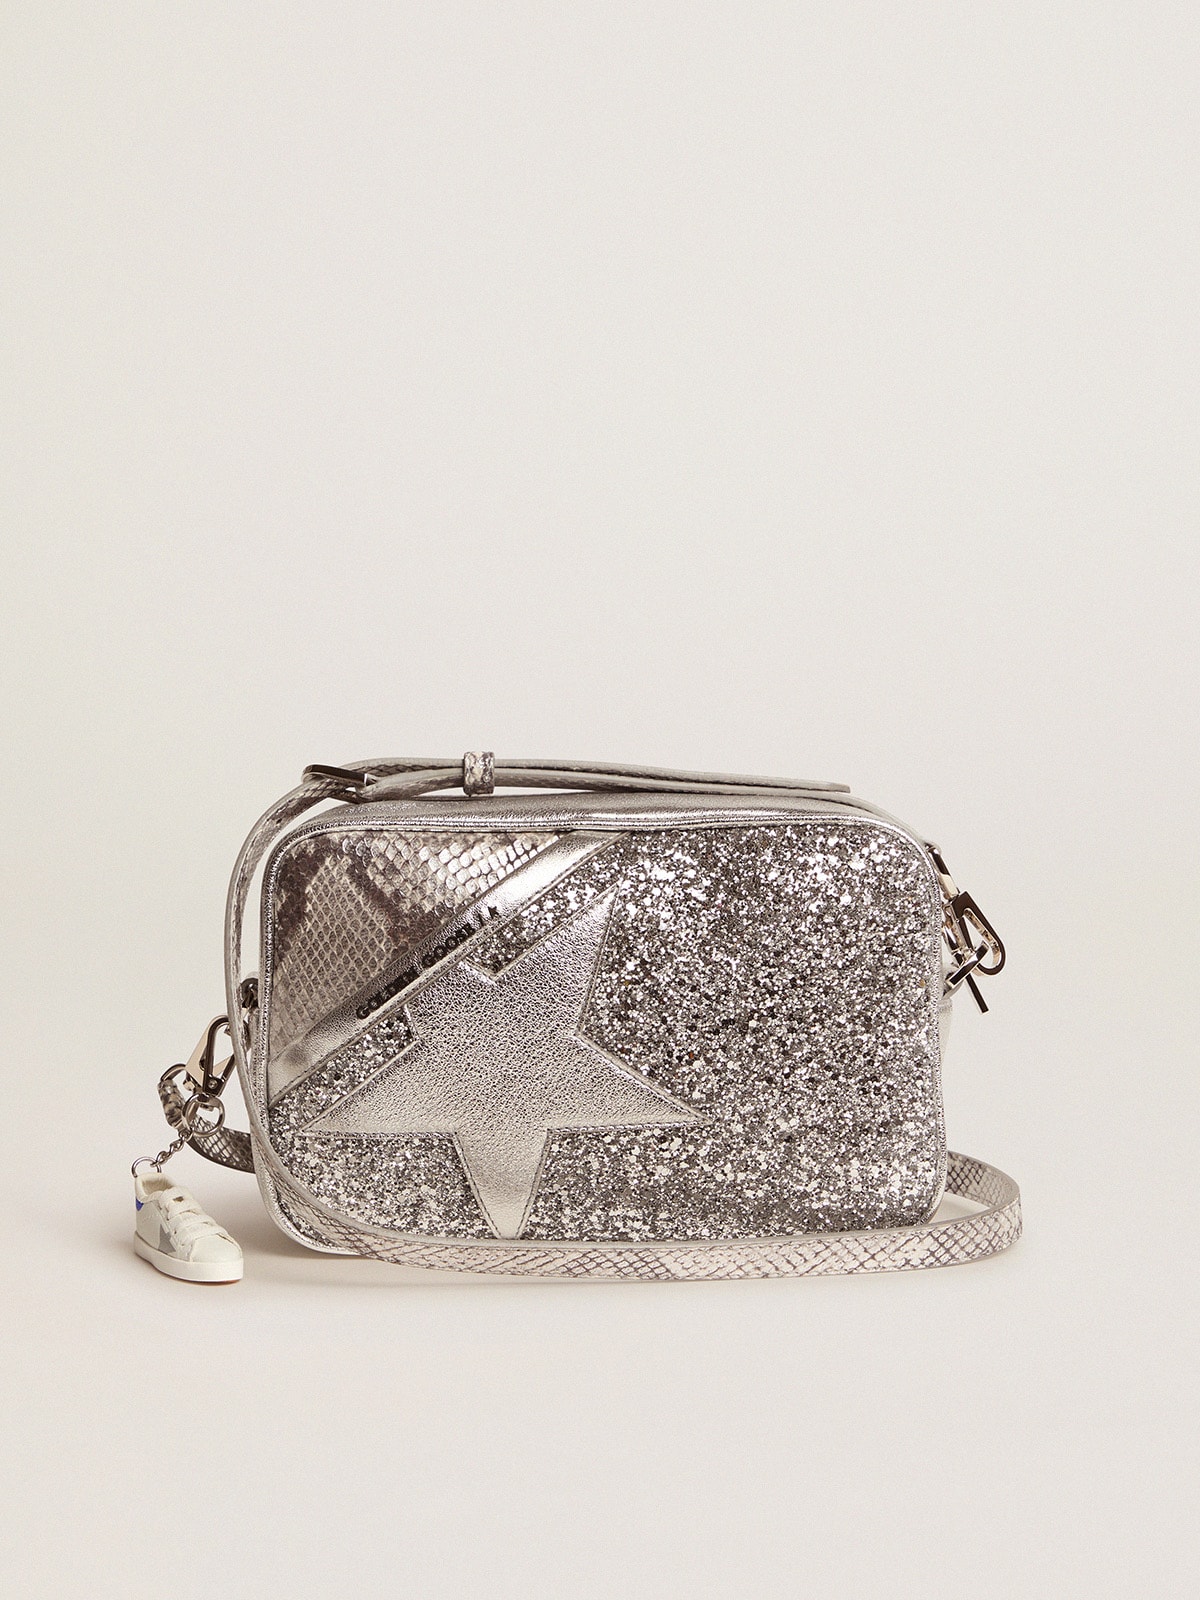 Golden Goose - Star Bag made of silver snake-print leather and glitter in 